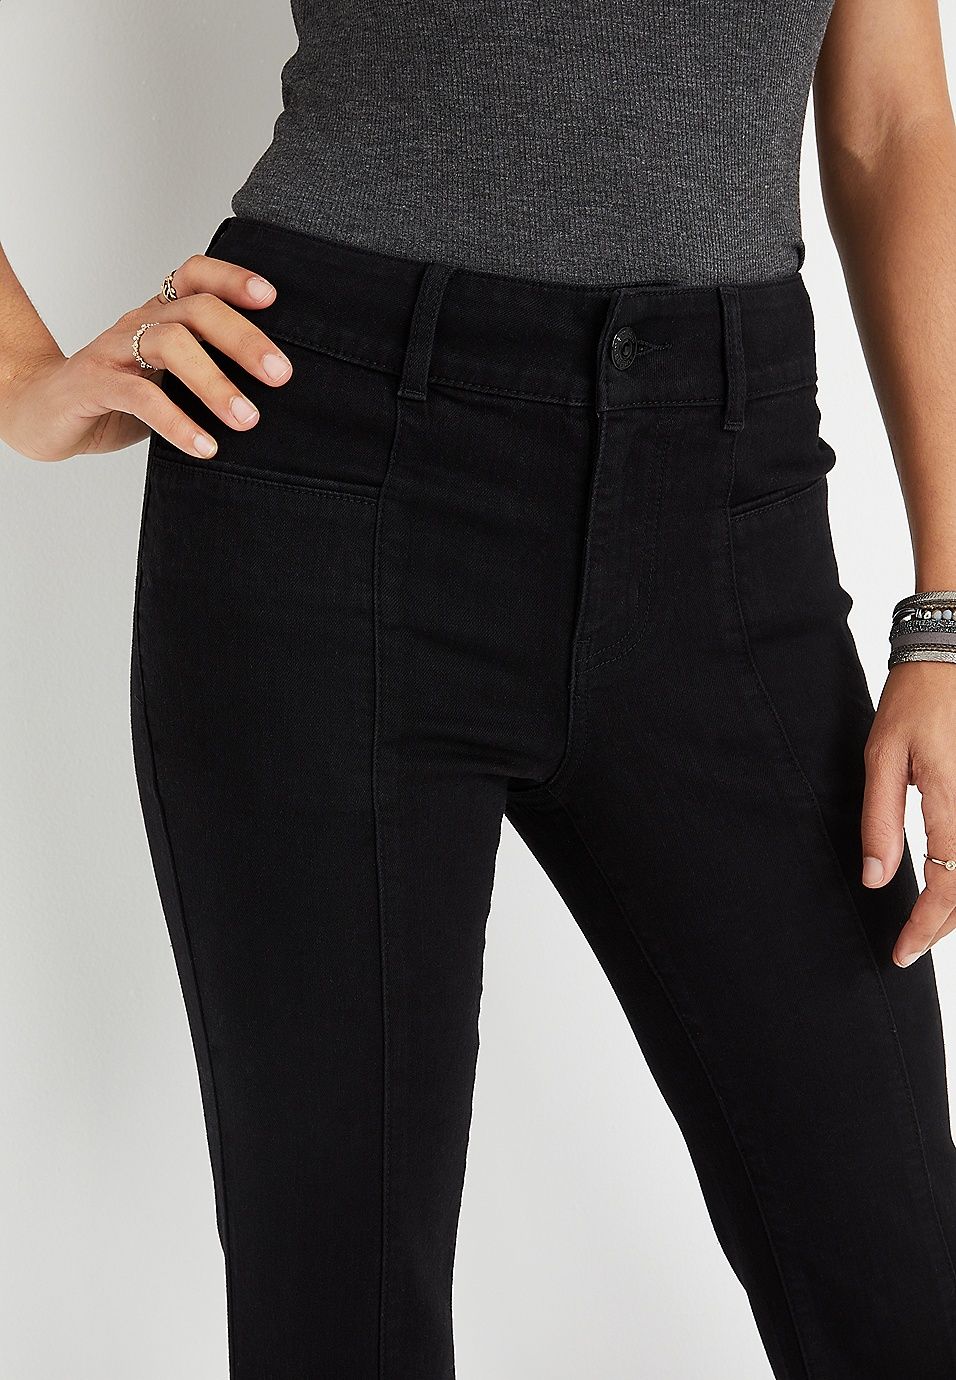 m jeans by maurices™ Black Seam Flare High Rise Jean | Maurices